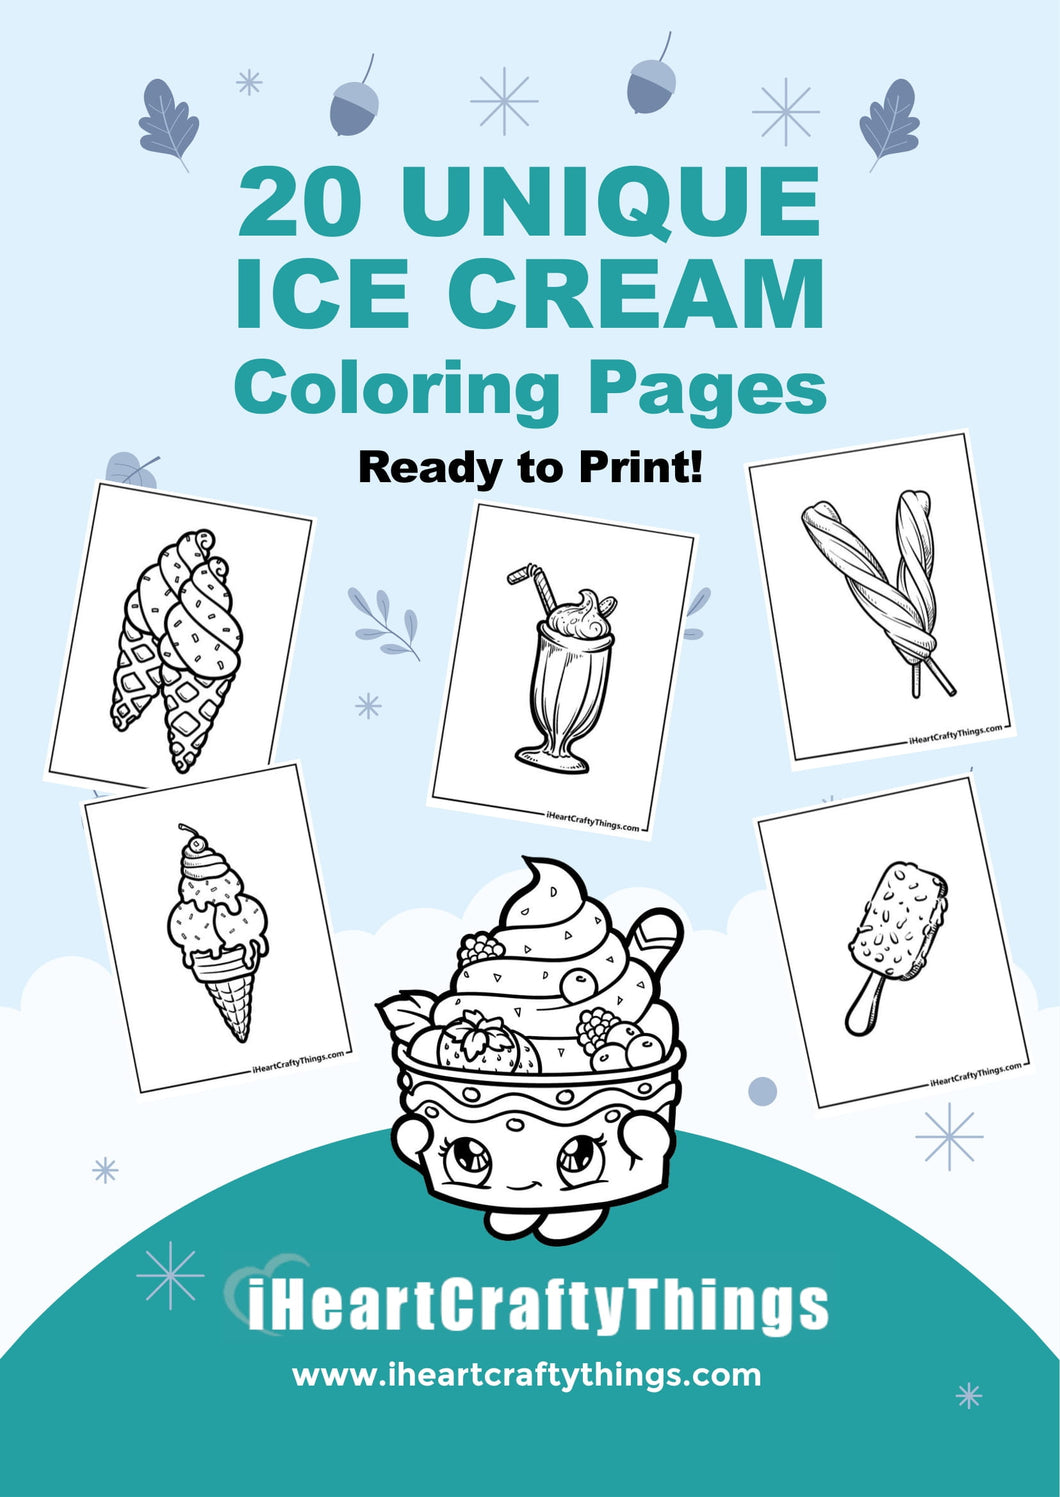 20 ICE CREAM COLORING PAGES